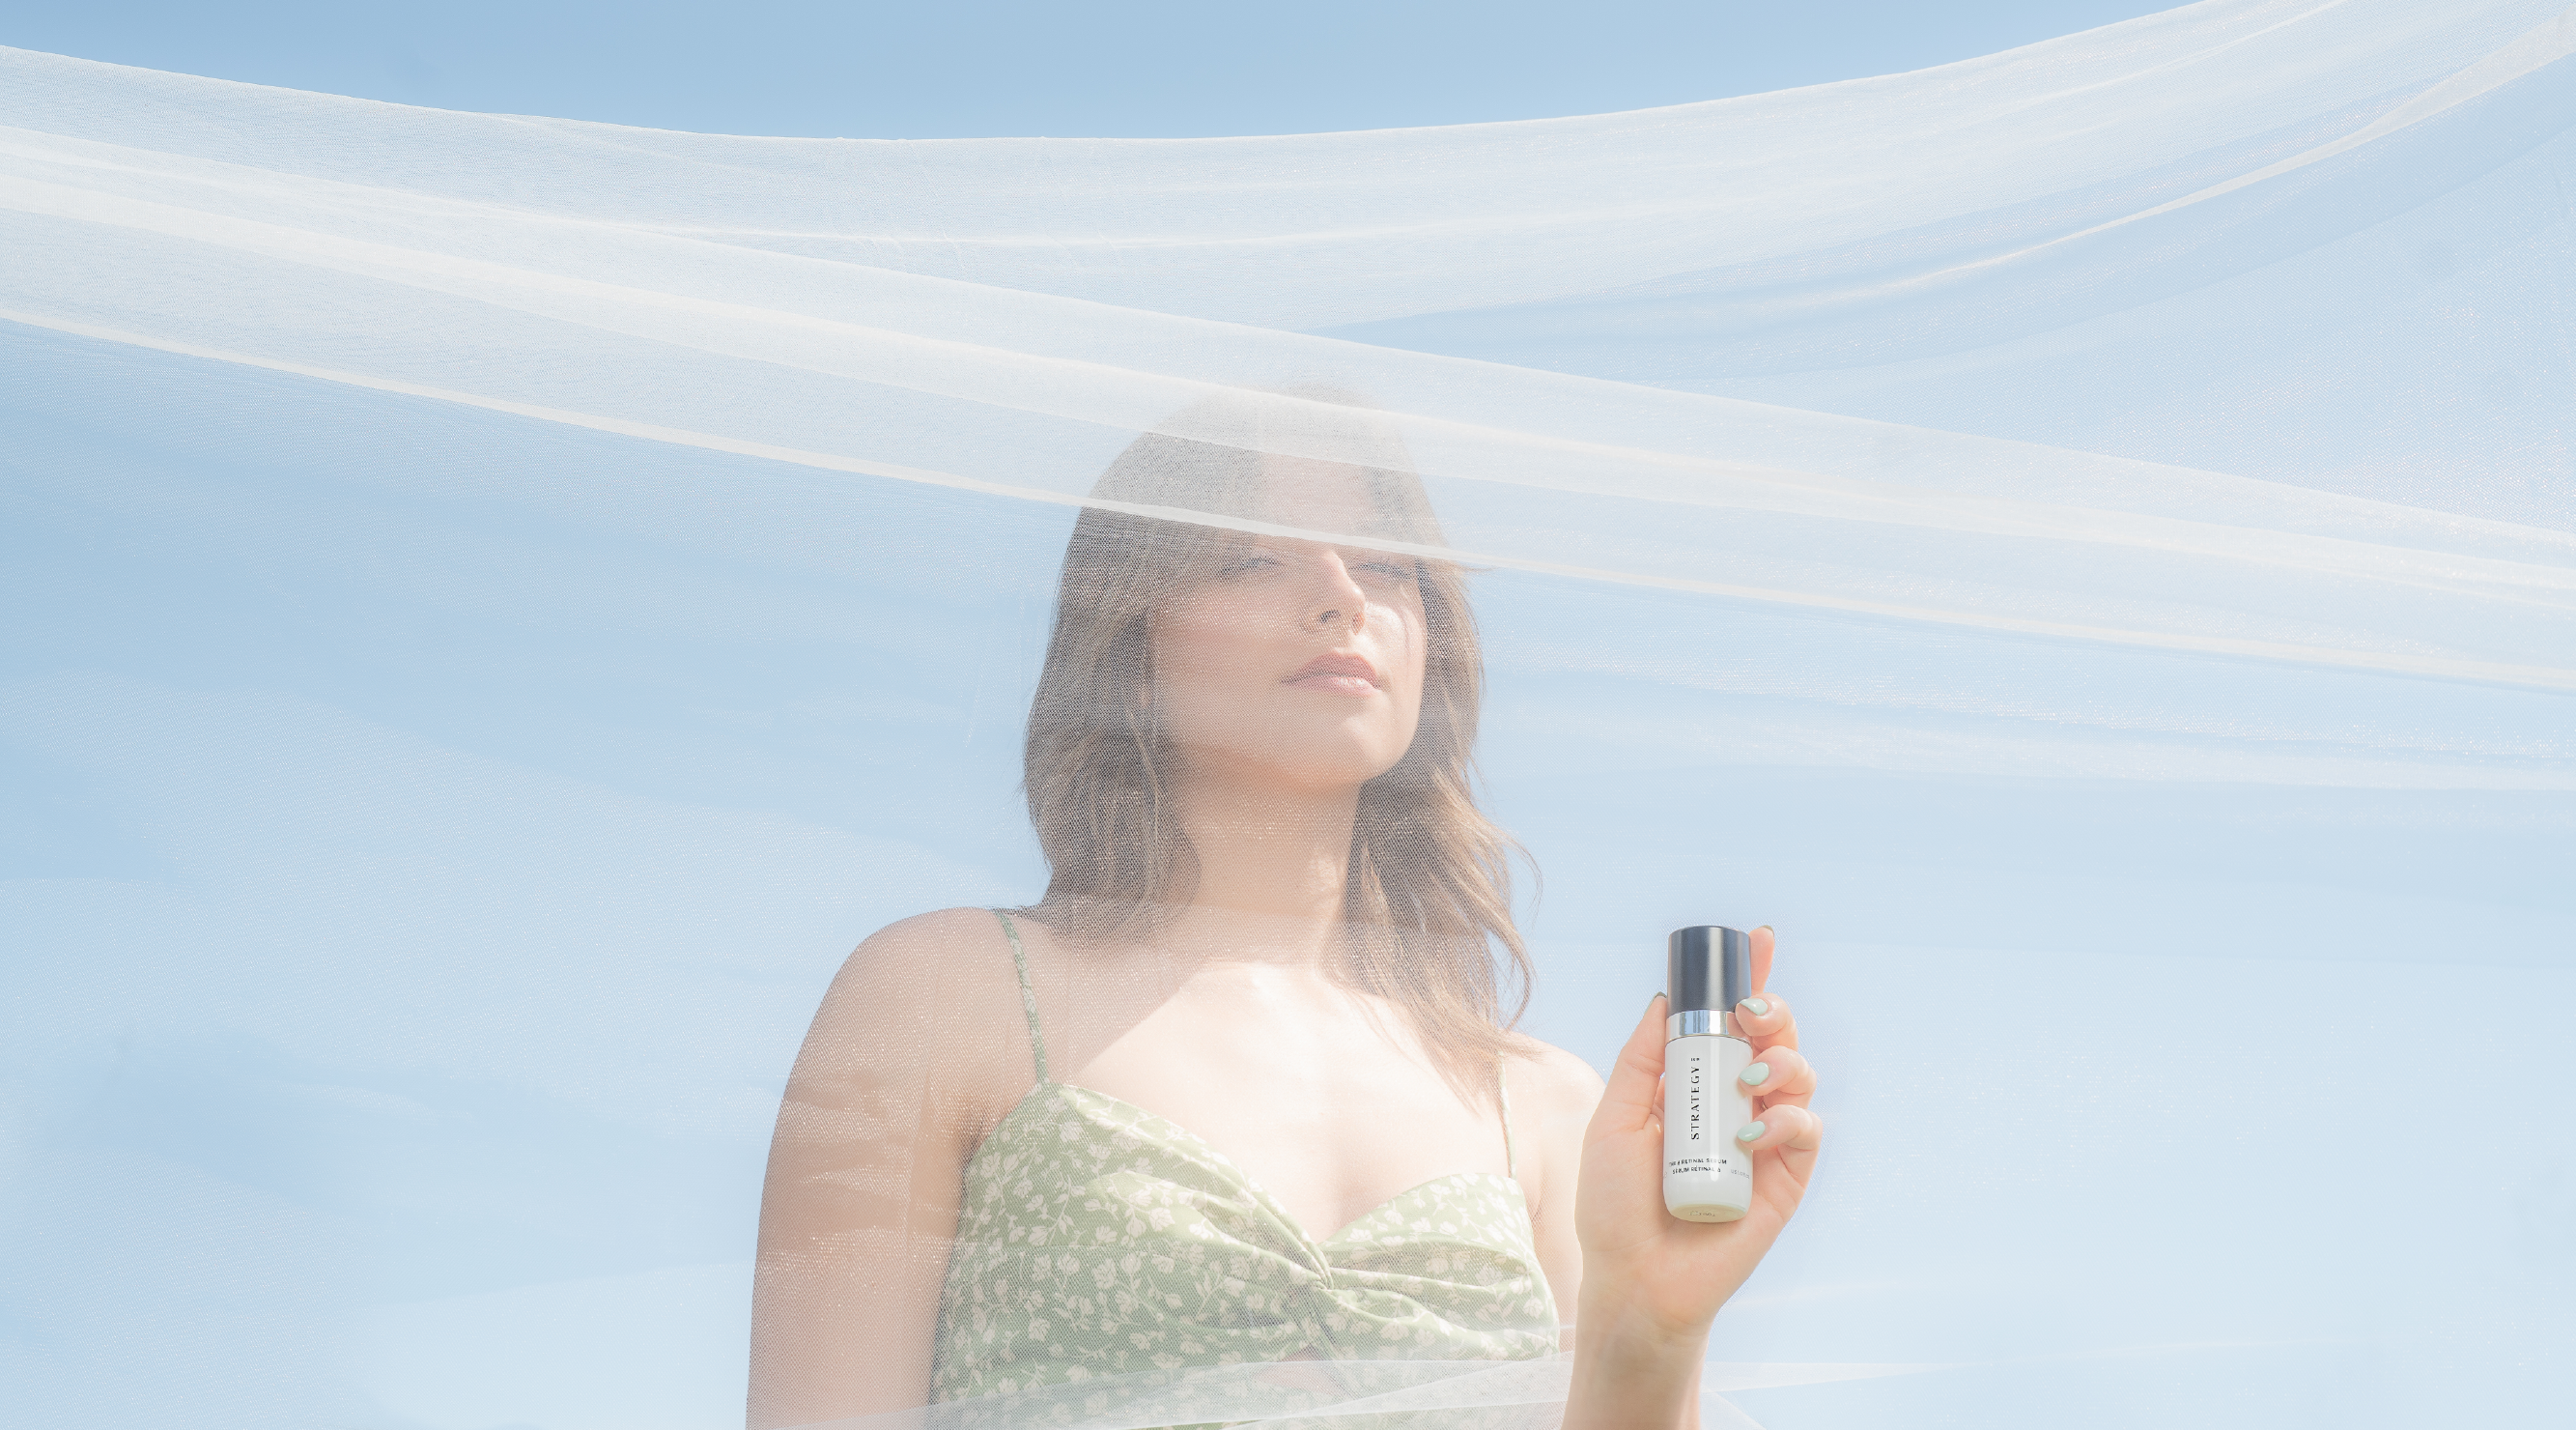 Nevaeh Day Spa: Woman standing behind wispy fabric holding a product with sky blue background.